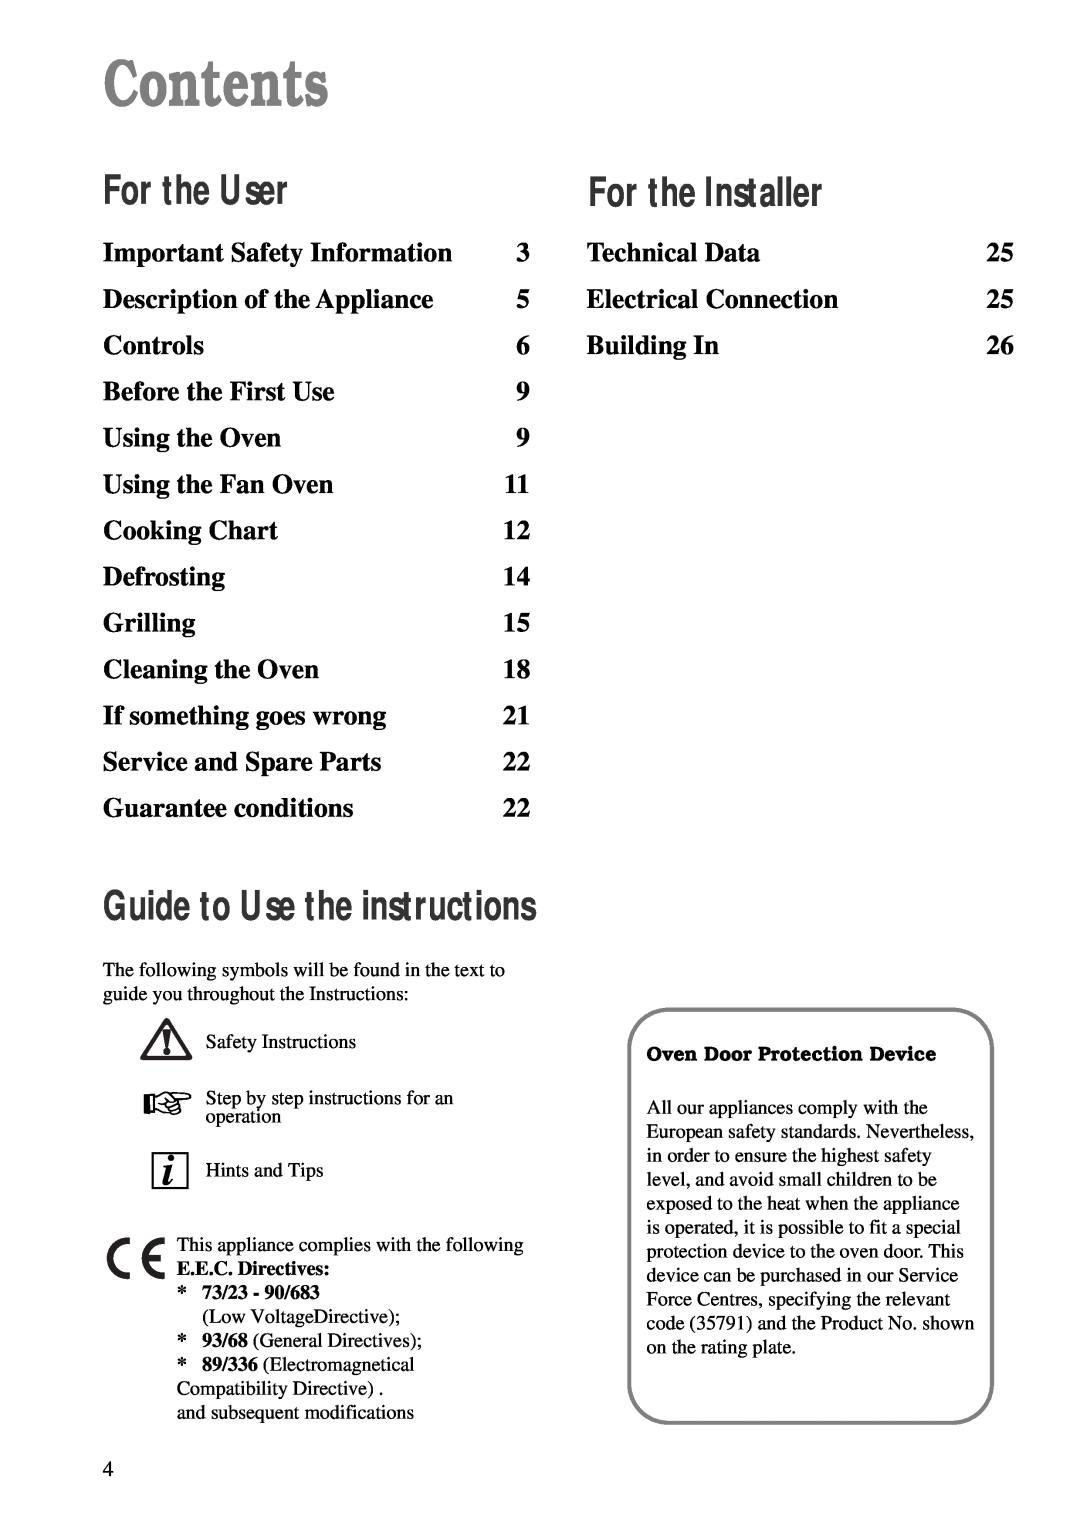 Tricity Bendix TBS 605 manual Contents, For the User, For the Installer, Guide to Use the instructions 